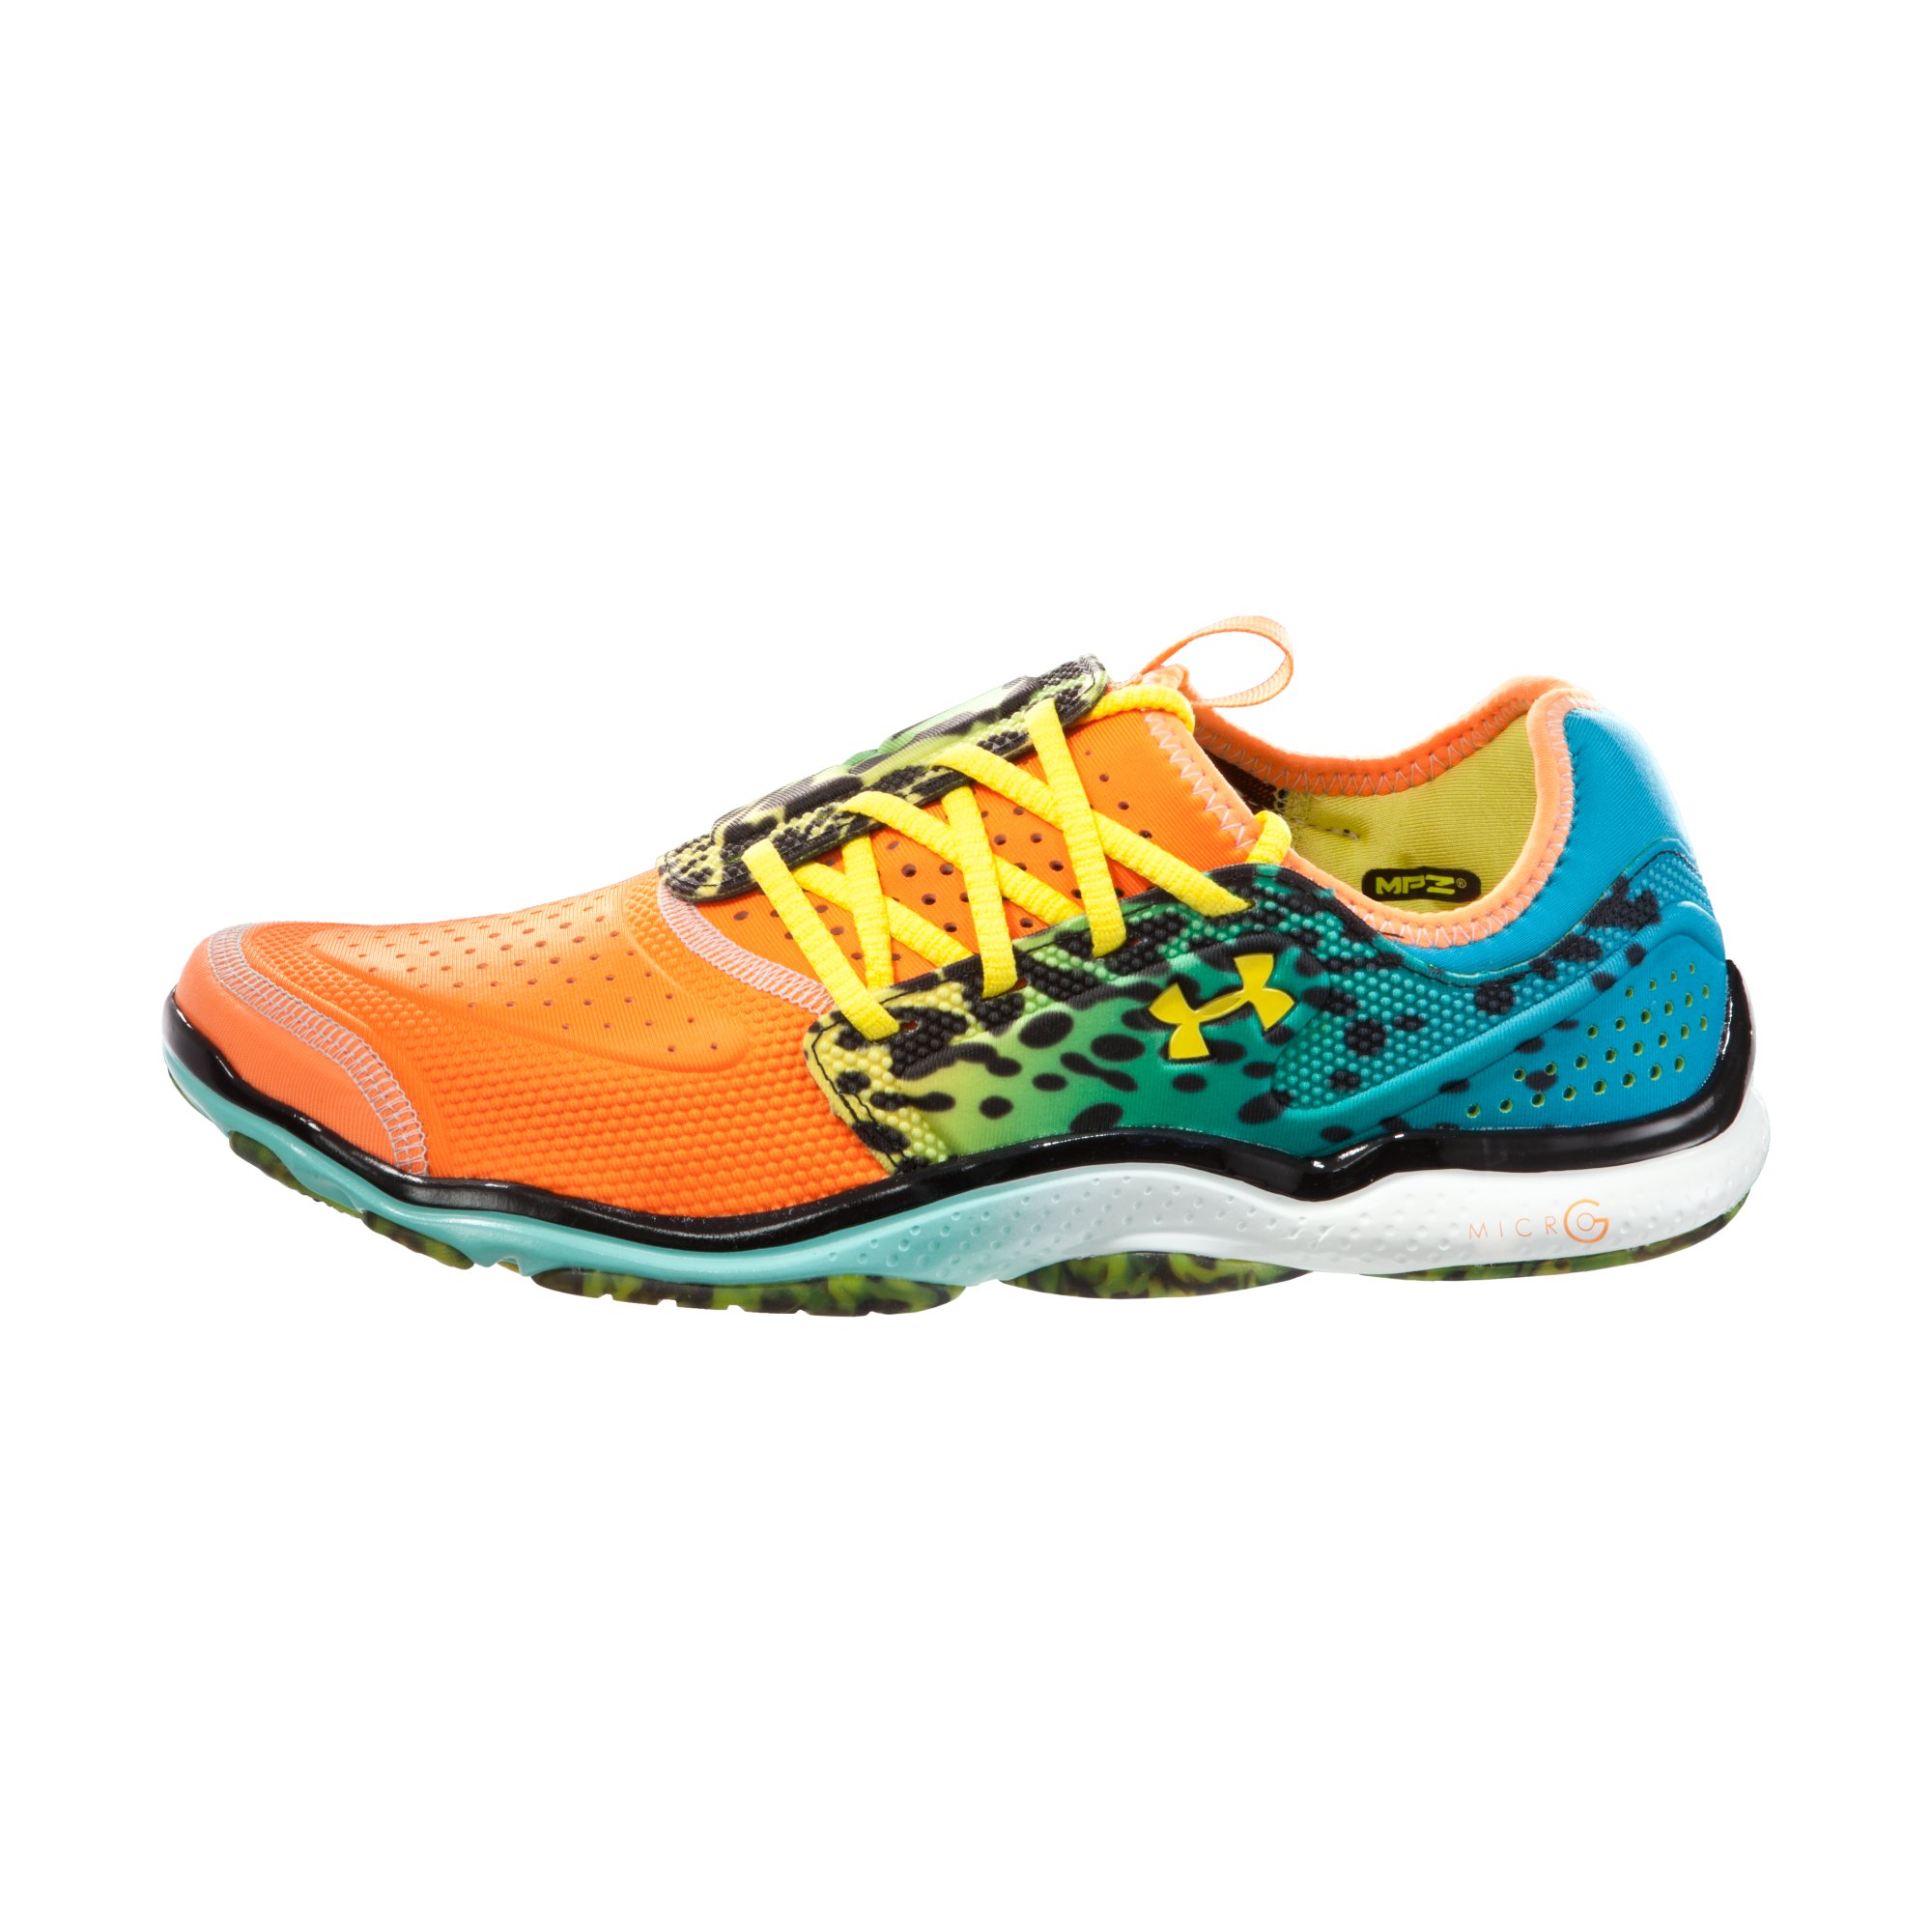 Under Armour Men's Micro G Toxic Six Running Shoes | Under Armour Running